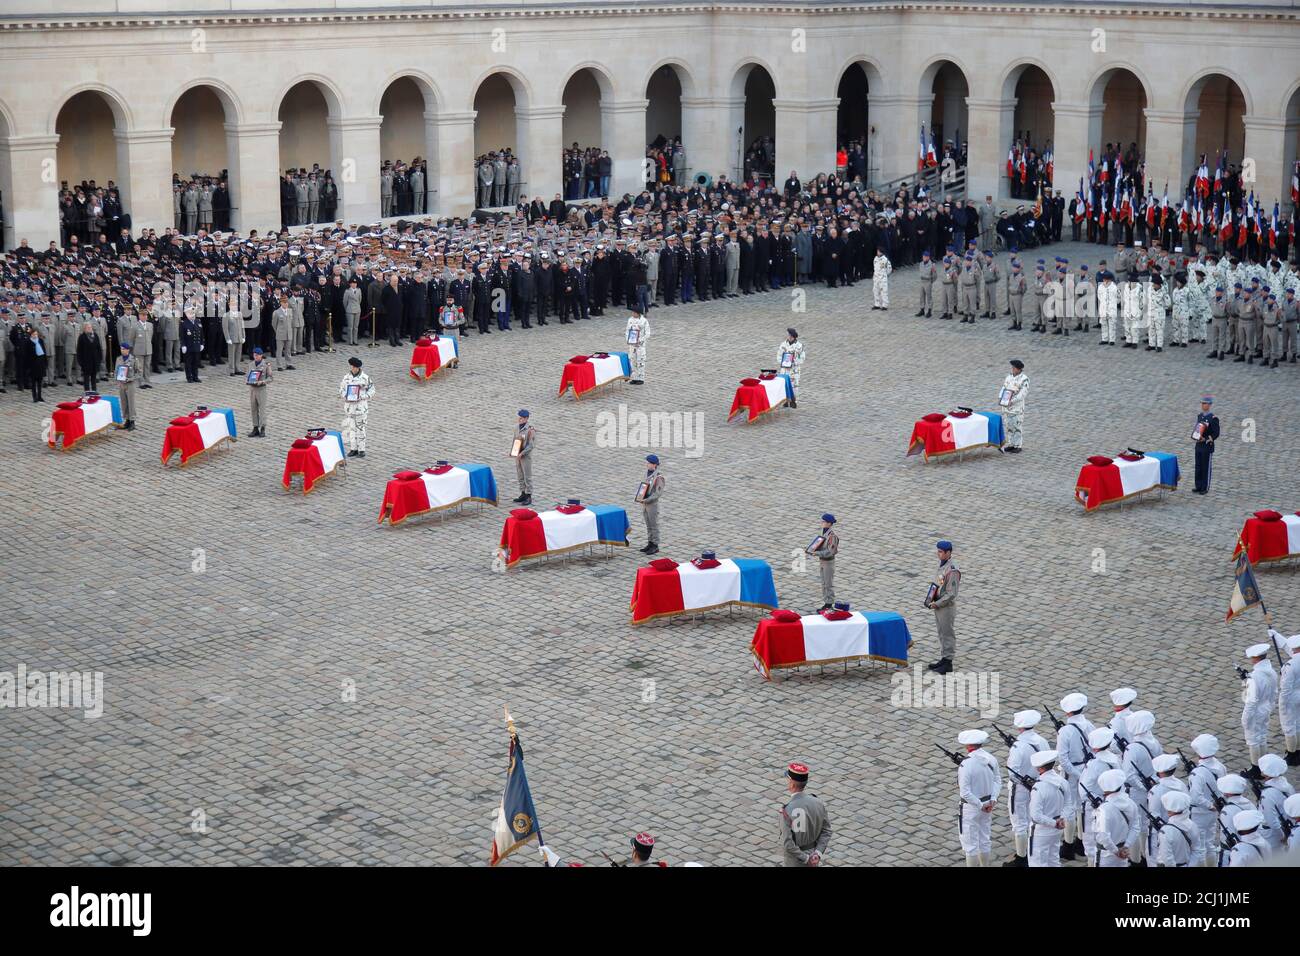 The flag-draped coffins of the thirteen French soldiers killed in Mali, are seen during a national ceremony at the Hotel National des Invalides in Paris, France, December 2, 2019. French soldiers Julien Carrette, Benjamin Gireud, Romain Salles de Saint-Paul, Clement Frison-Roche, Nicolas Megard, Romain Chomel de Jarnieu, Pierre Bockel, Alex Morisse, Jeremy Leusie, Alexandre Protin, Antoine Serre, Valentin Duval, Andrei Jouk died in Mali when their helicopters collided in the dark last week as they hunted for Islamist militants.  REUTERS/Charles Platiau Stock Photo